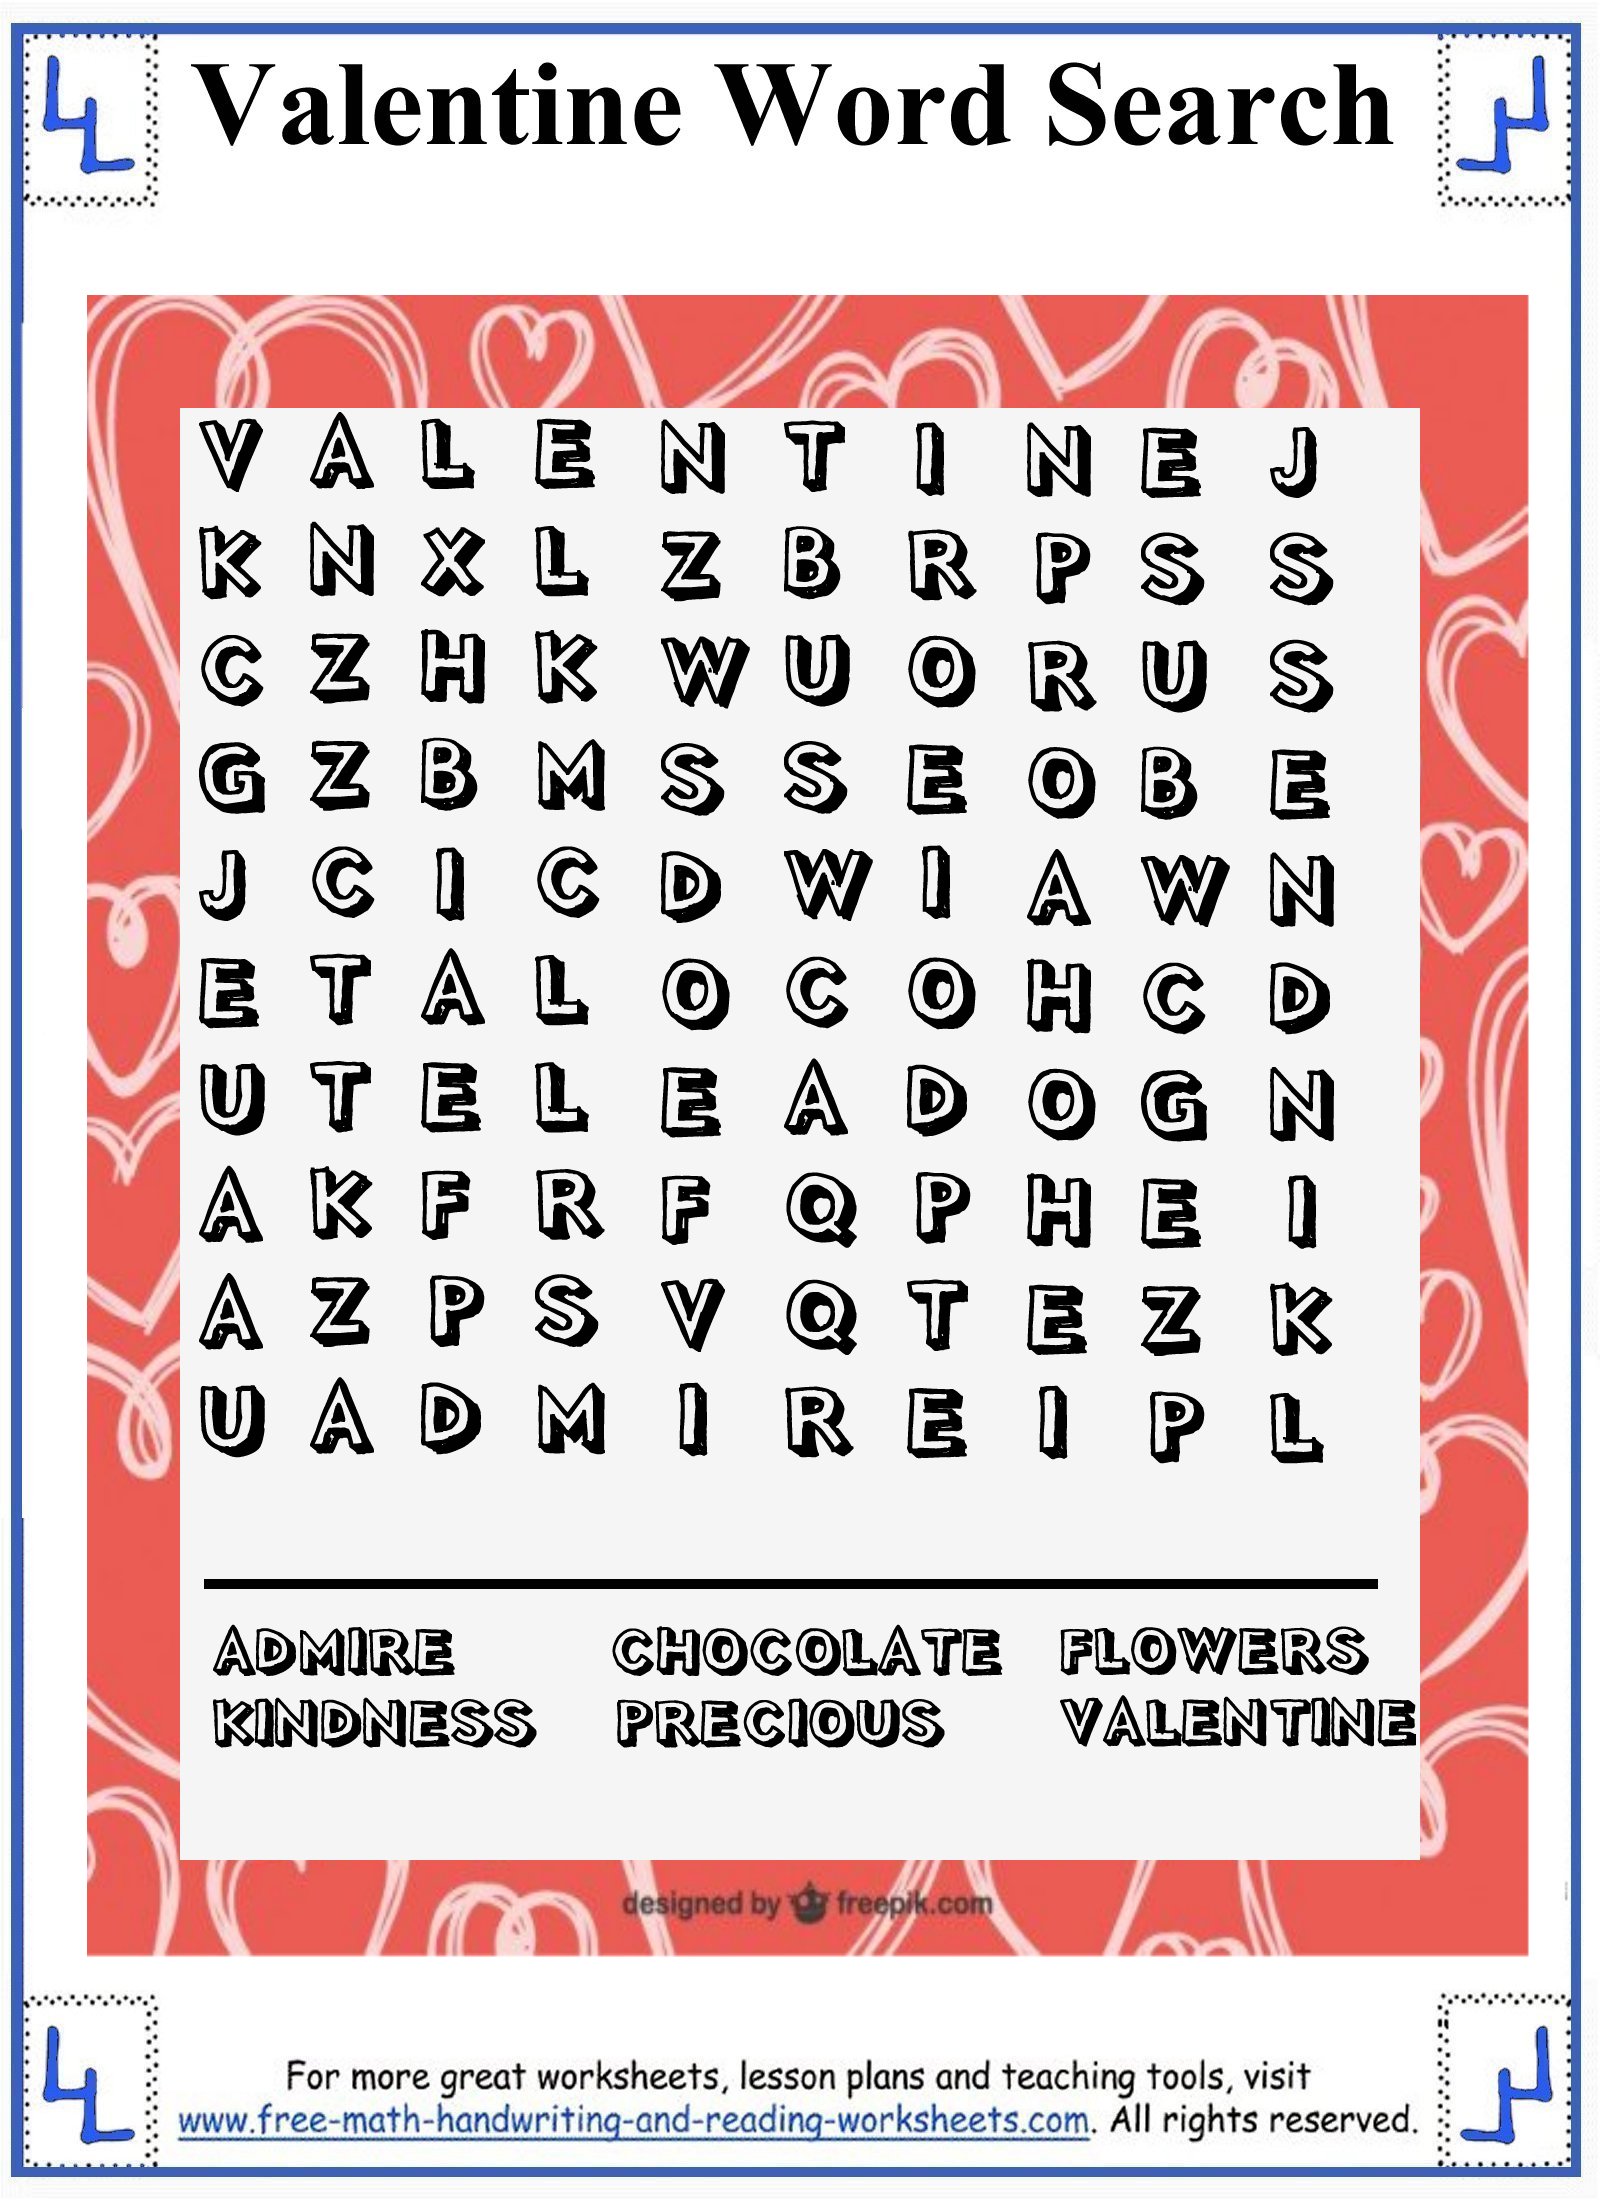 valentine-word-search-printable-puzzles